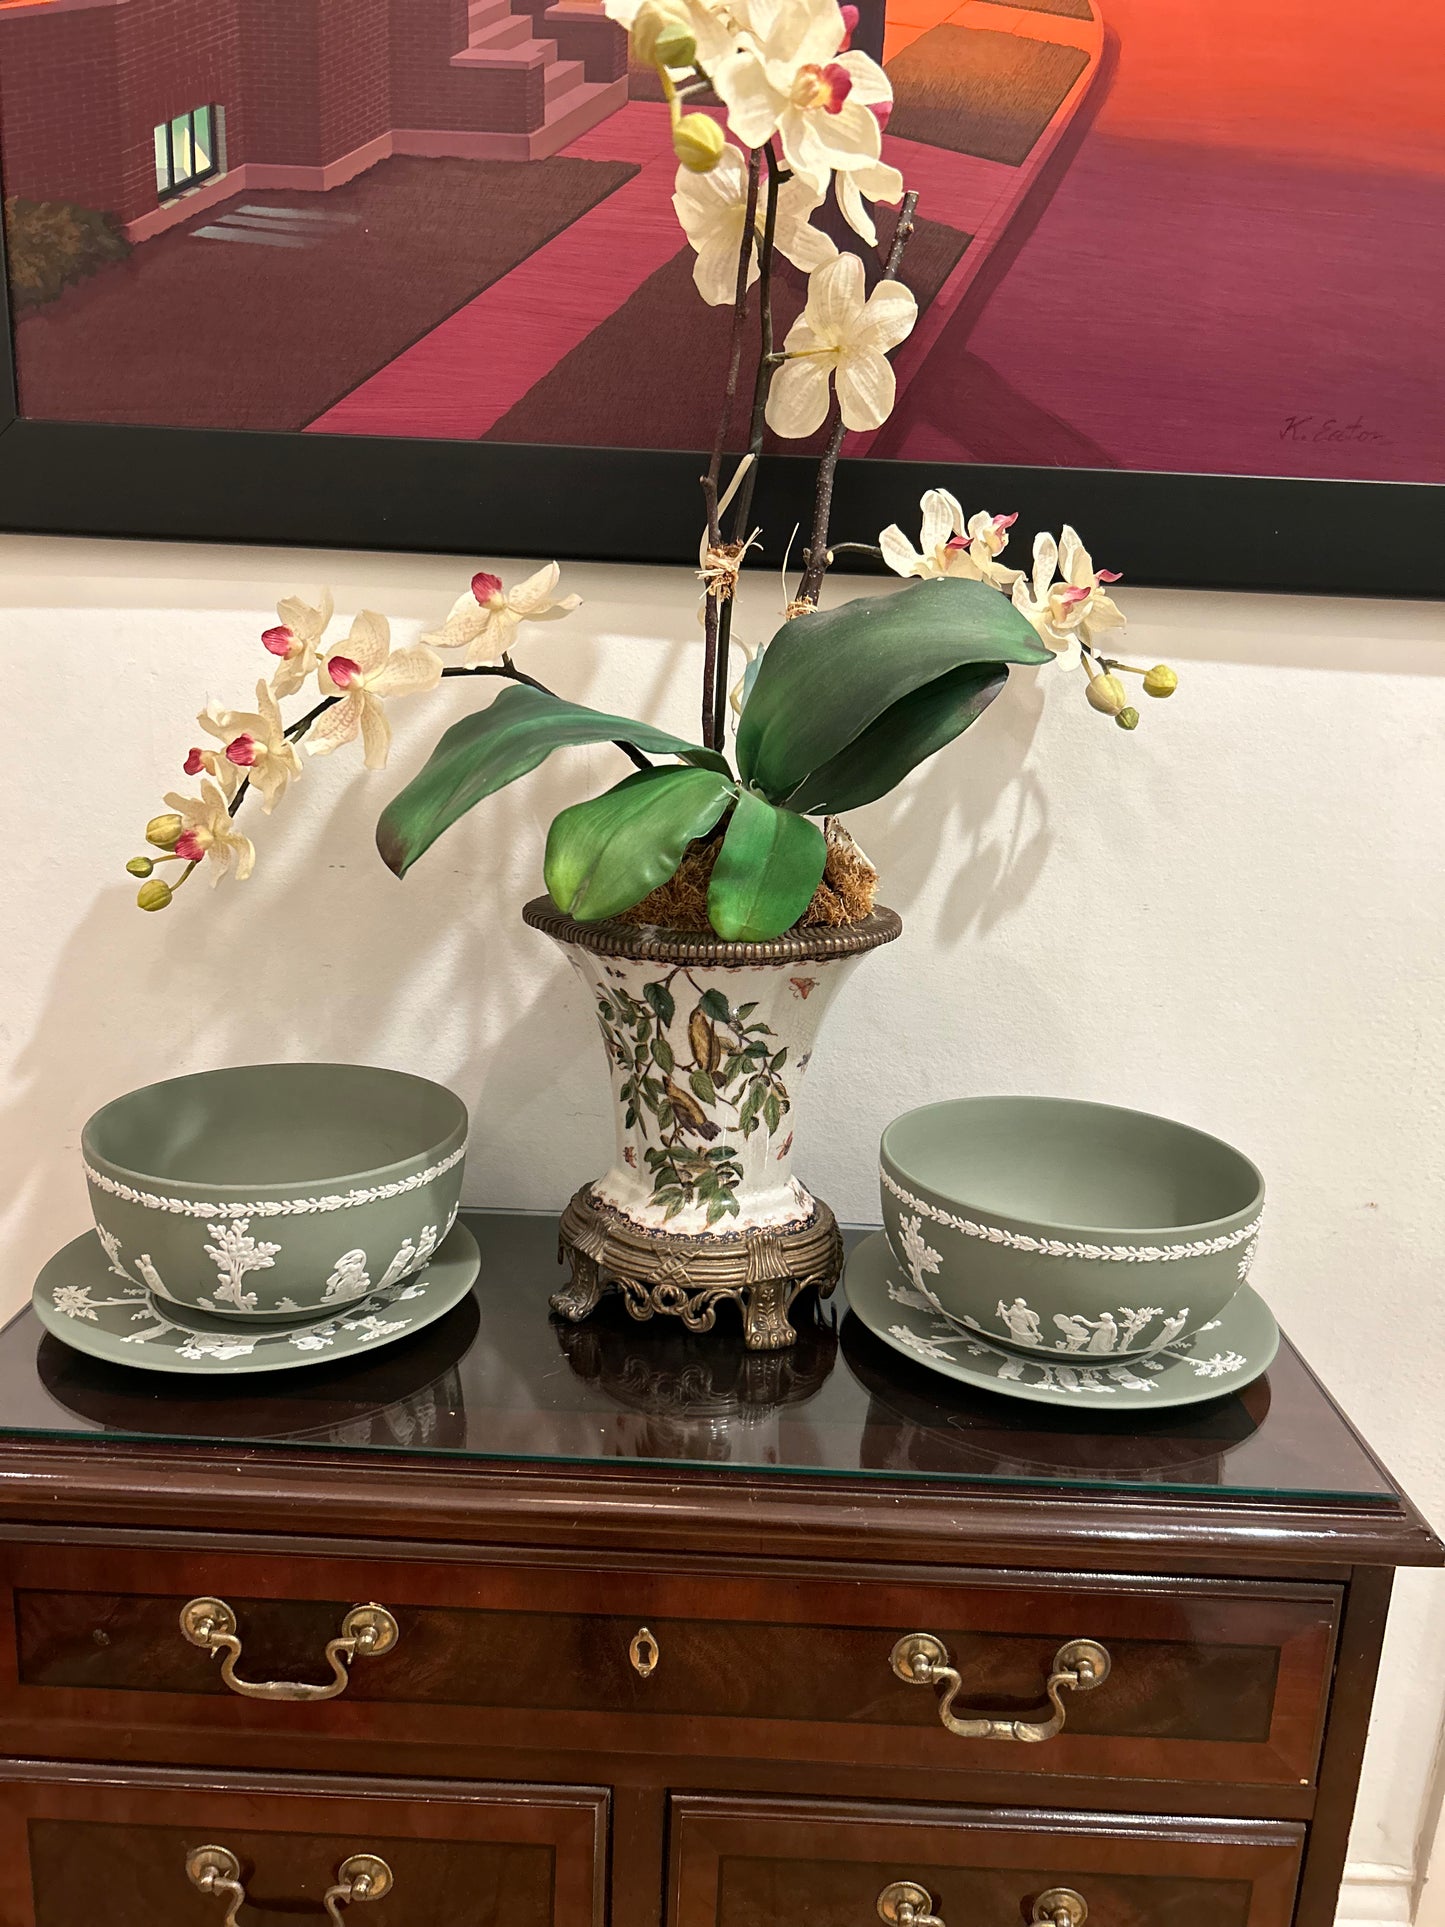 Vintage Wedgewood Sage Green Jasperware Large Bowls with Undertrays  Each Bowl and Tray are Priced as a Two piece set!